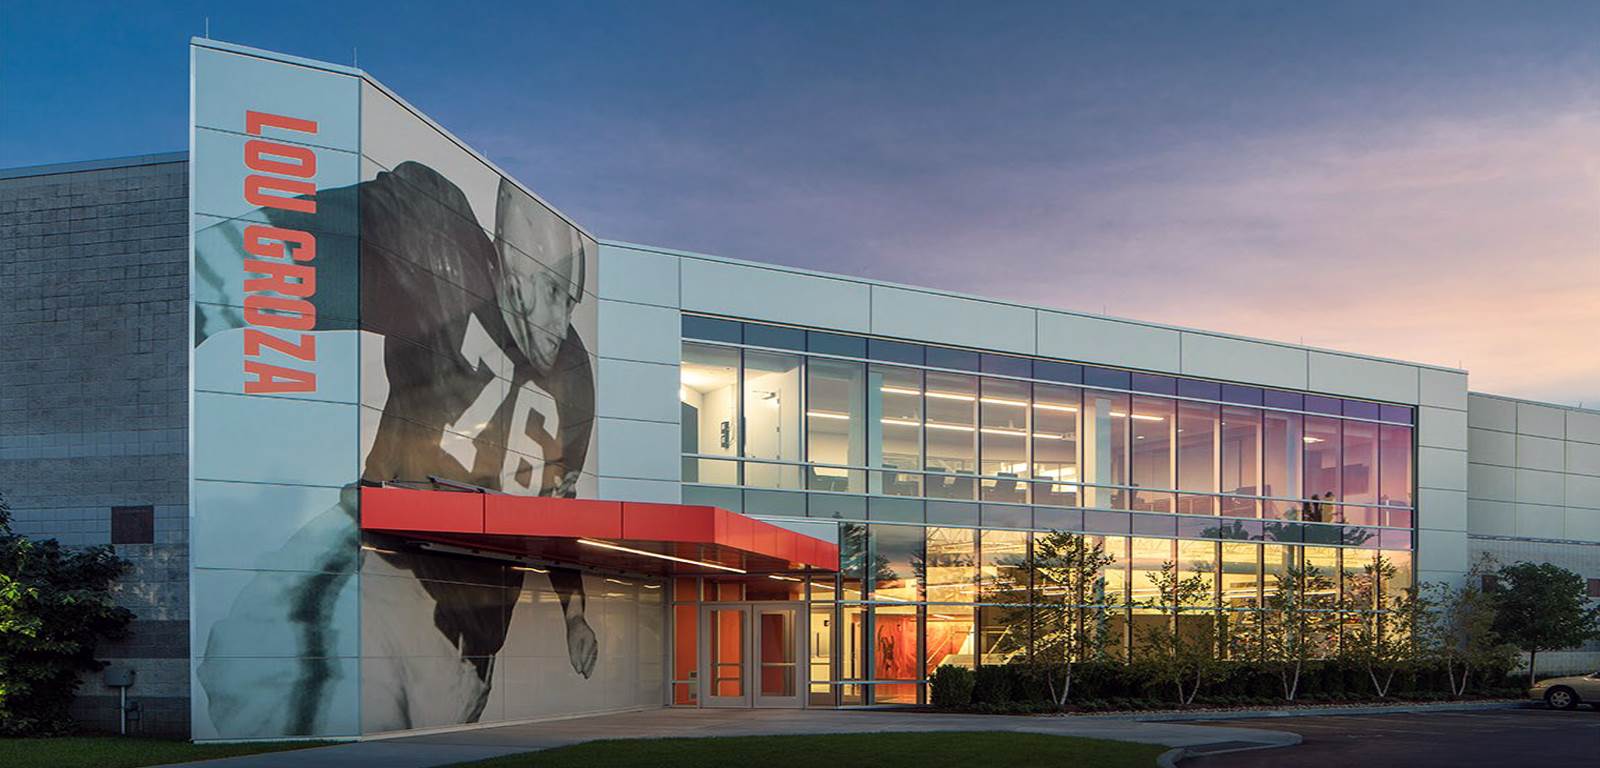 CLEVELAND BROWNS | TRAINING FACILITY RENOVATION